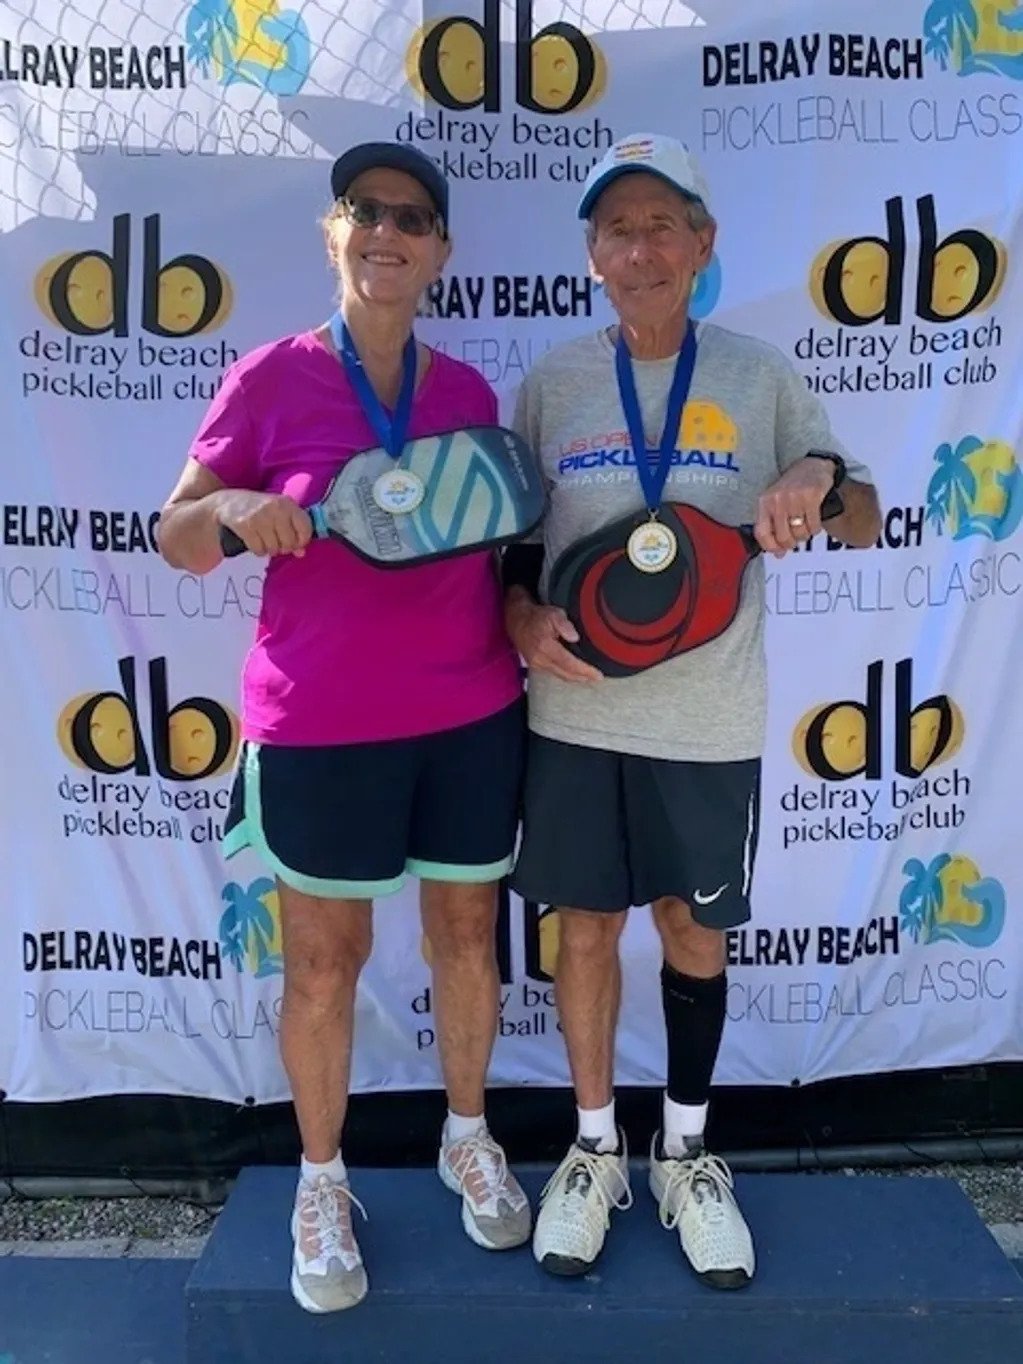 Bob Savar and Chris Jackson, winners of the mixed doubles, ages 65-69, at the Delray Beach Pickleball Classic in 2019